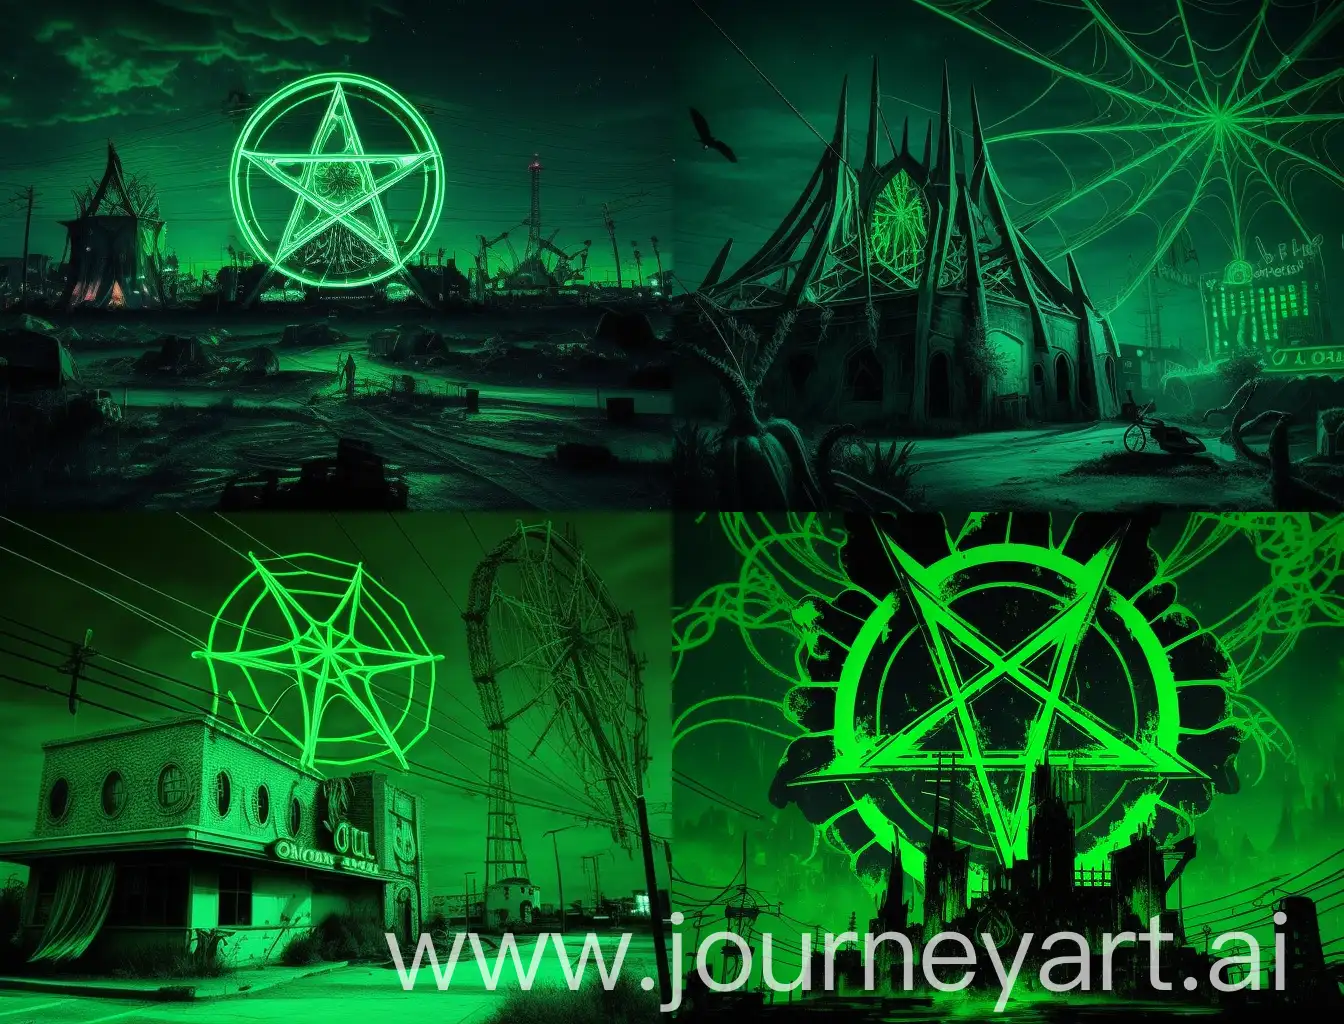 city full of casinos and nuclear power plants and cheap amusement parks and circus tents and sunken cruise ships with spider webs neon green the sky is green and there's a green pentagram in the sky